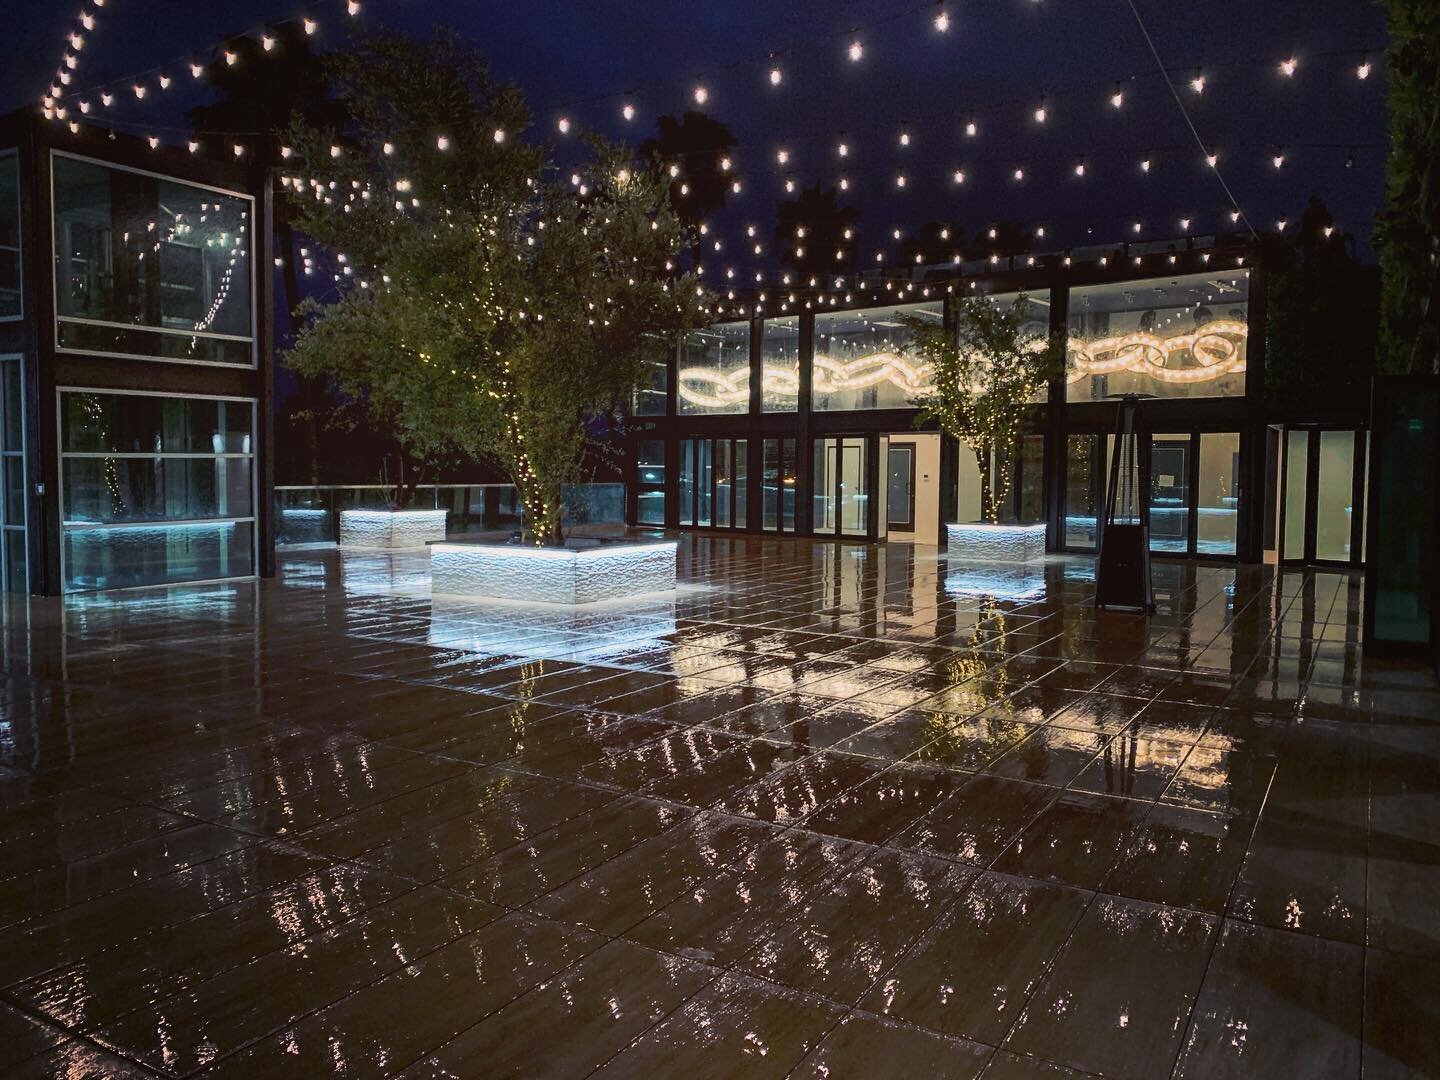 Hadn&rsquo;t spent a rainy night here yet, thou as a native Southern Californian I was Freezing, it was so sexy and beautiful ... #rainynight #laeventspace #larooftop #laweddingvenue  #outdoorlosangelesvenues